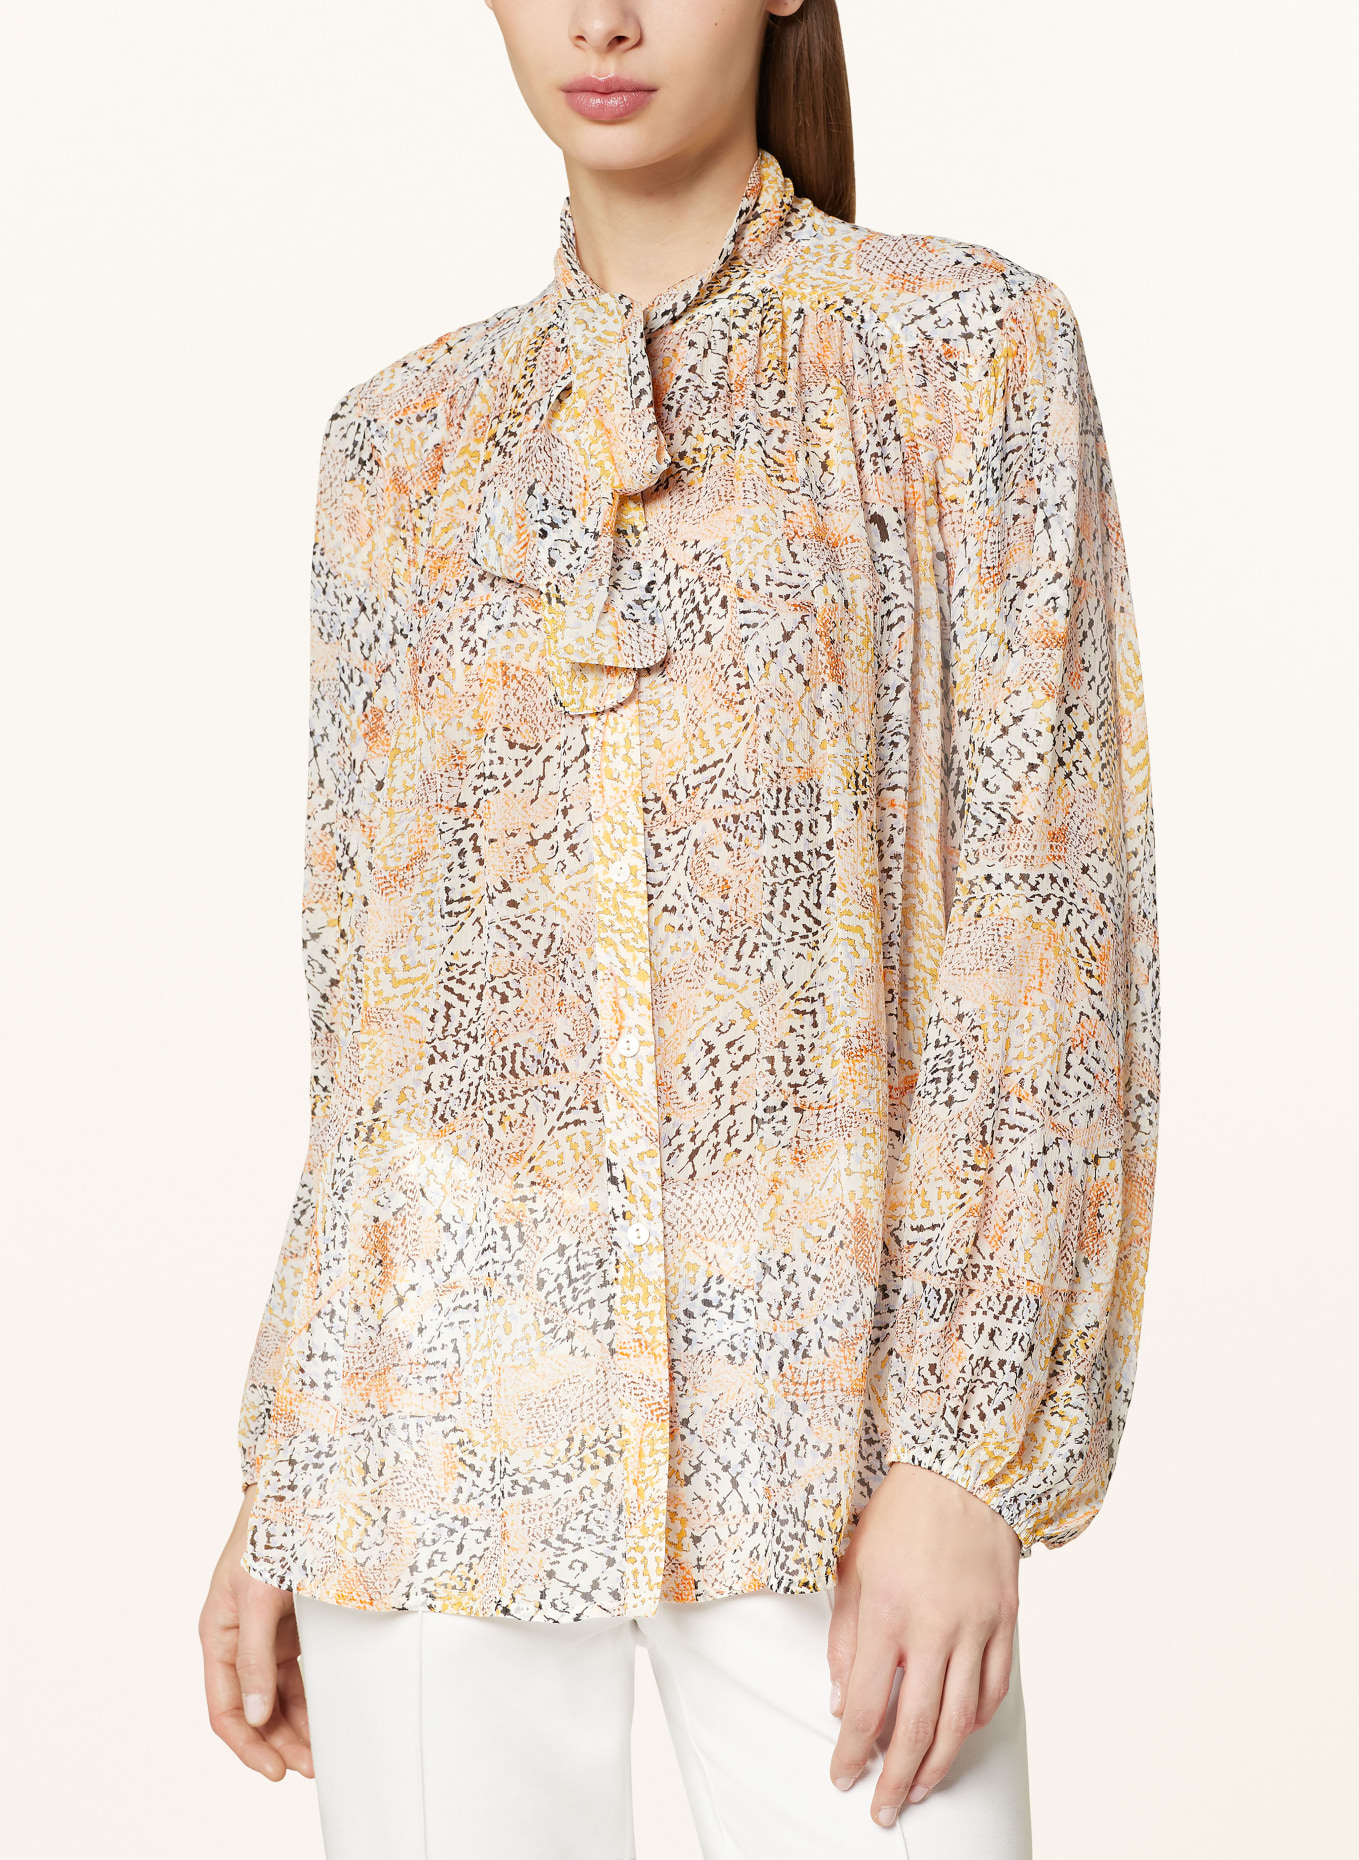 Lala Berlin Bow-tie blouse BAYLIV, Color: CREAM/ YELLOW/ BLACK (Image 4)